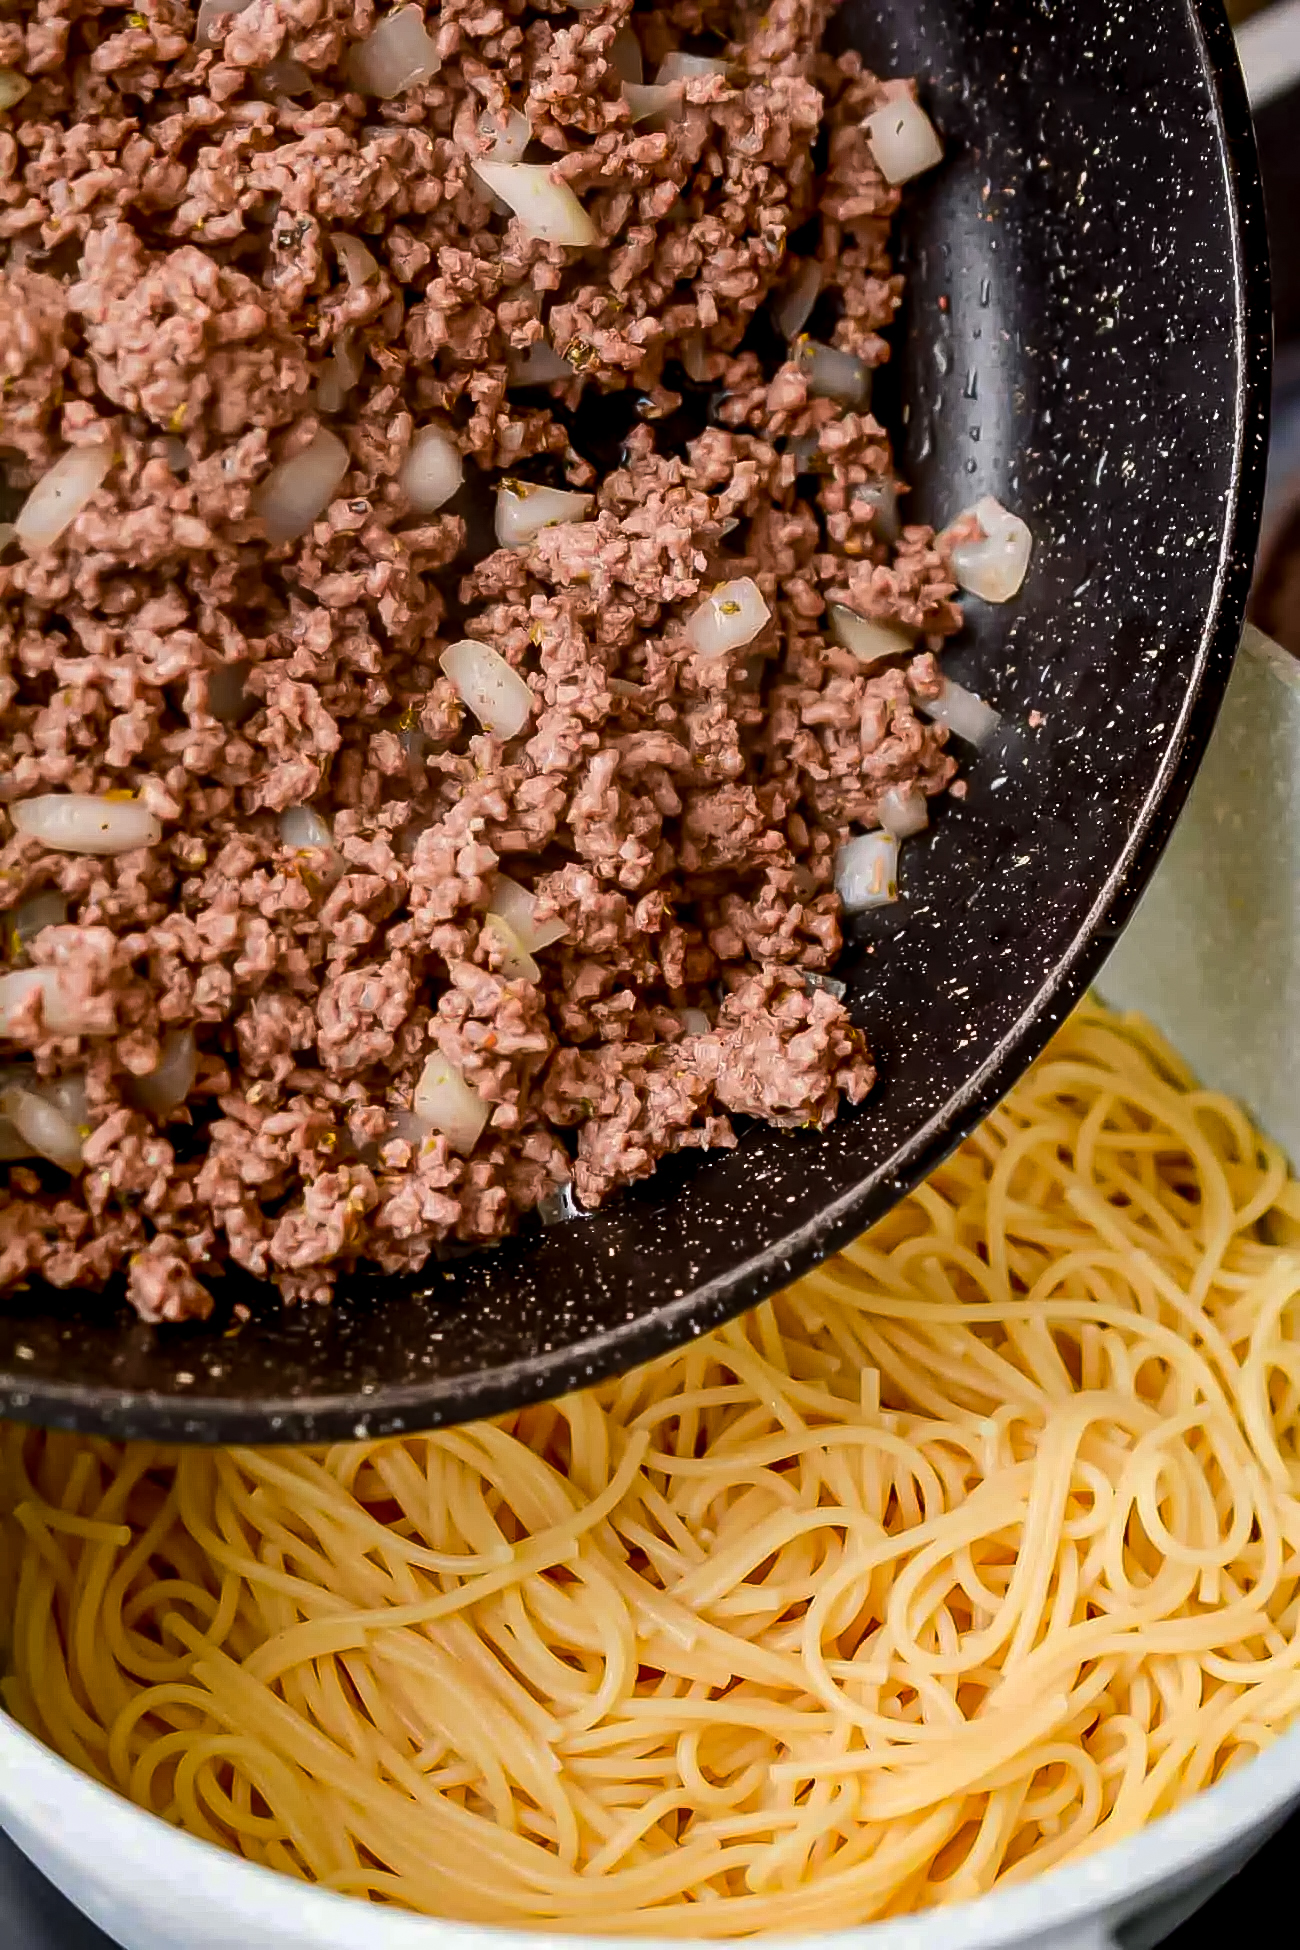 Mix together the spaghetti noodles and the meat mixture.